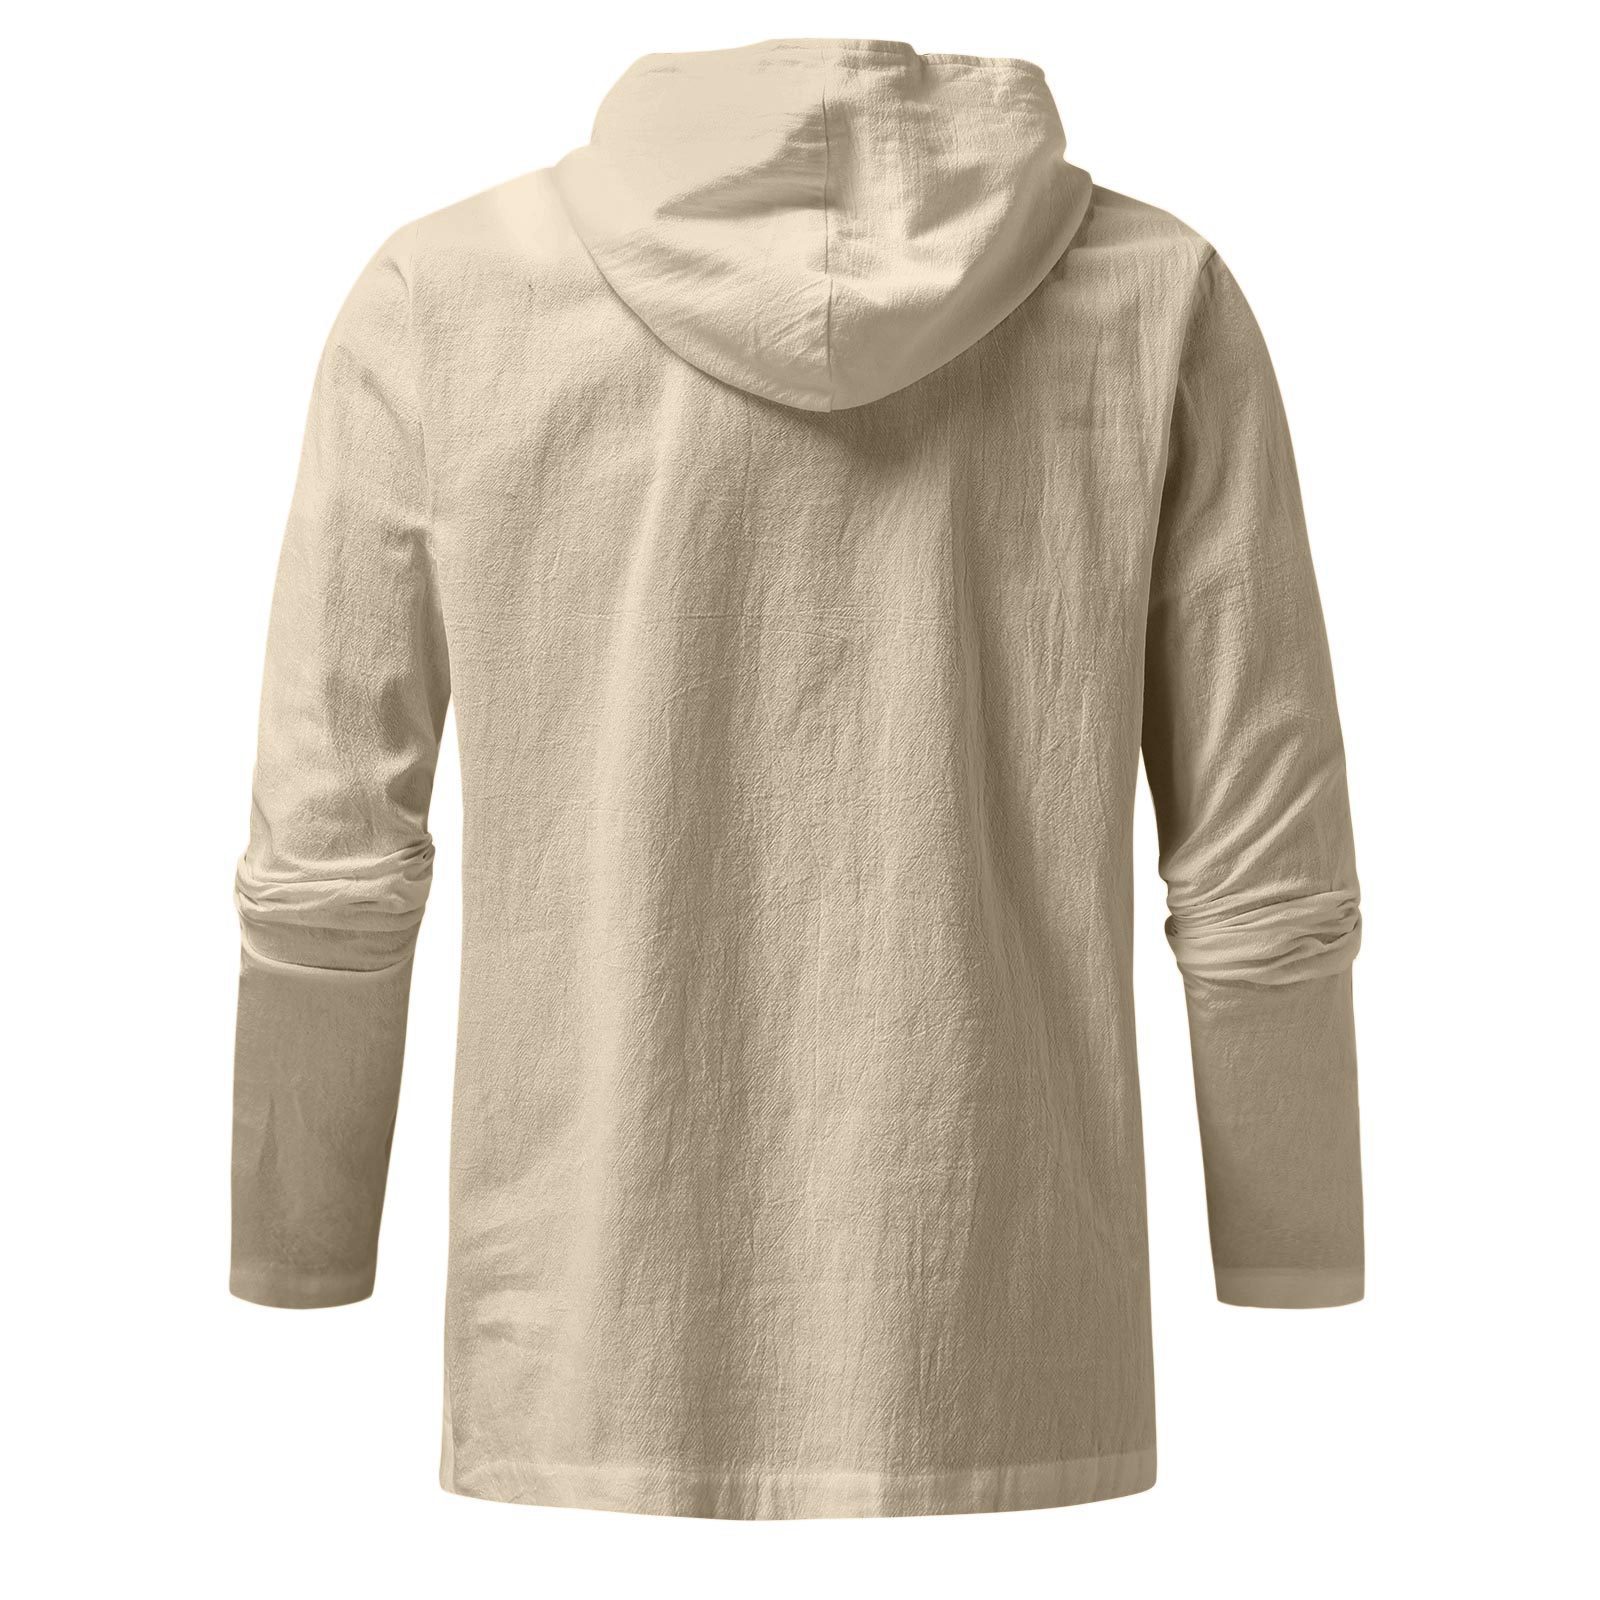 Casual Cotton And Linen Strap Solid Color Long-Sleeved Shirt